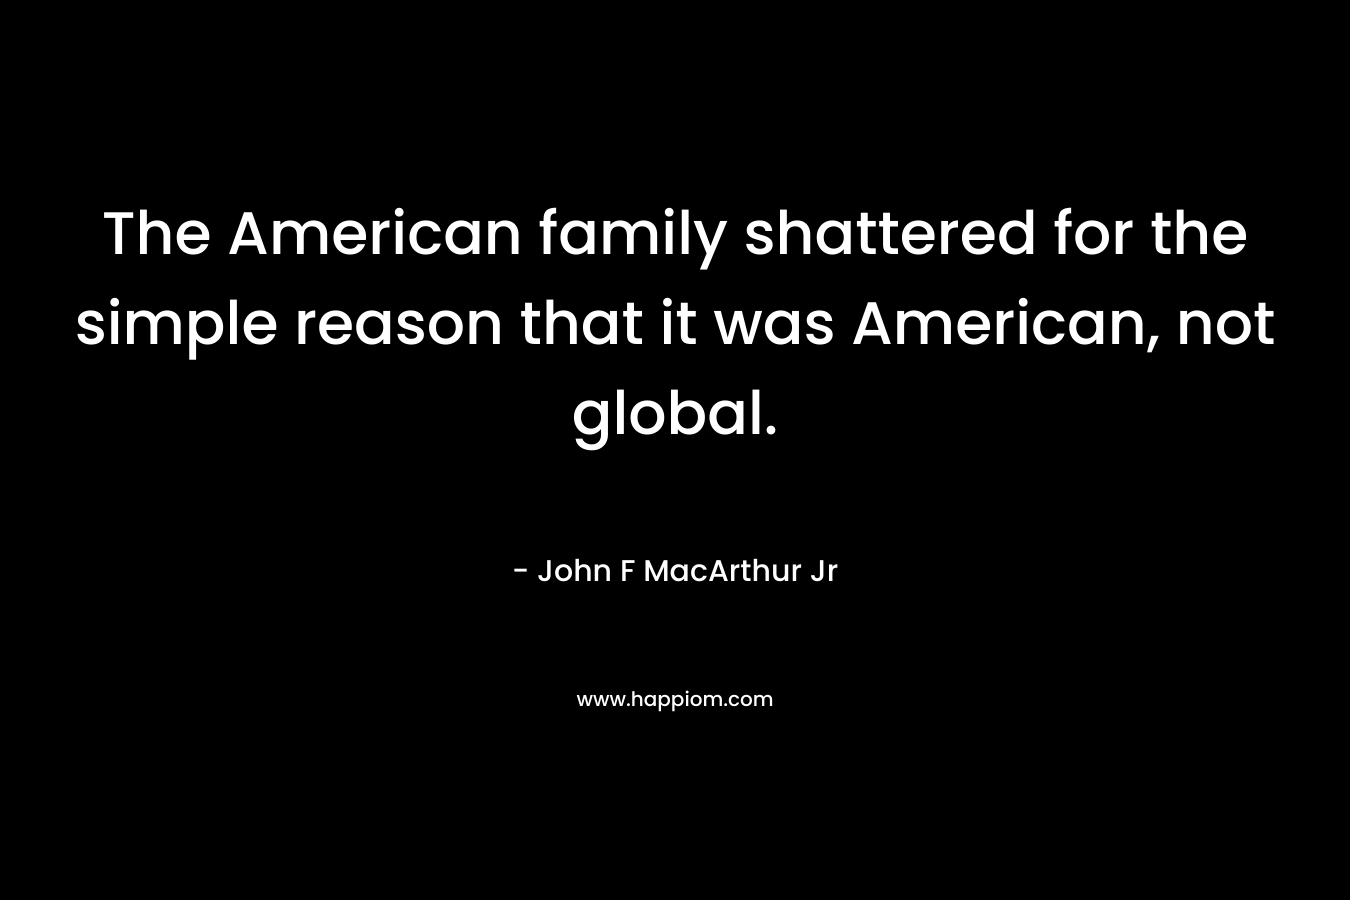 The American family shattered for the simple reason that it was American, not global.